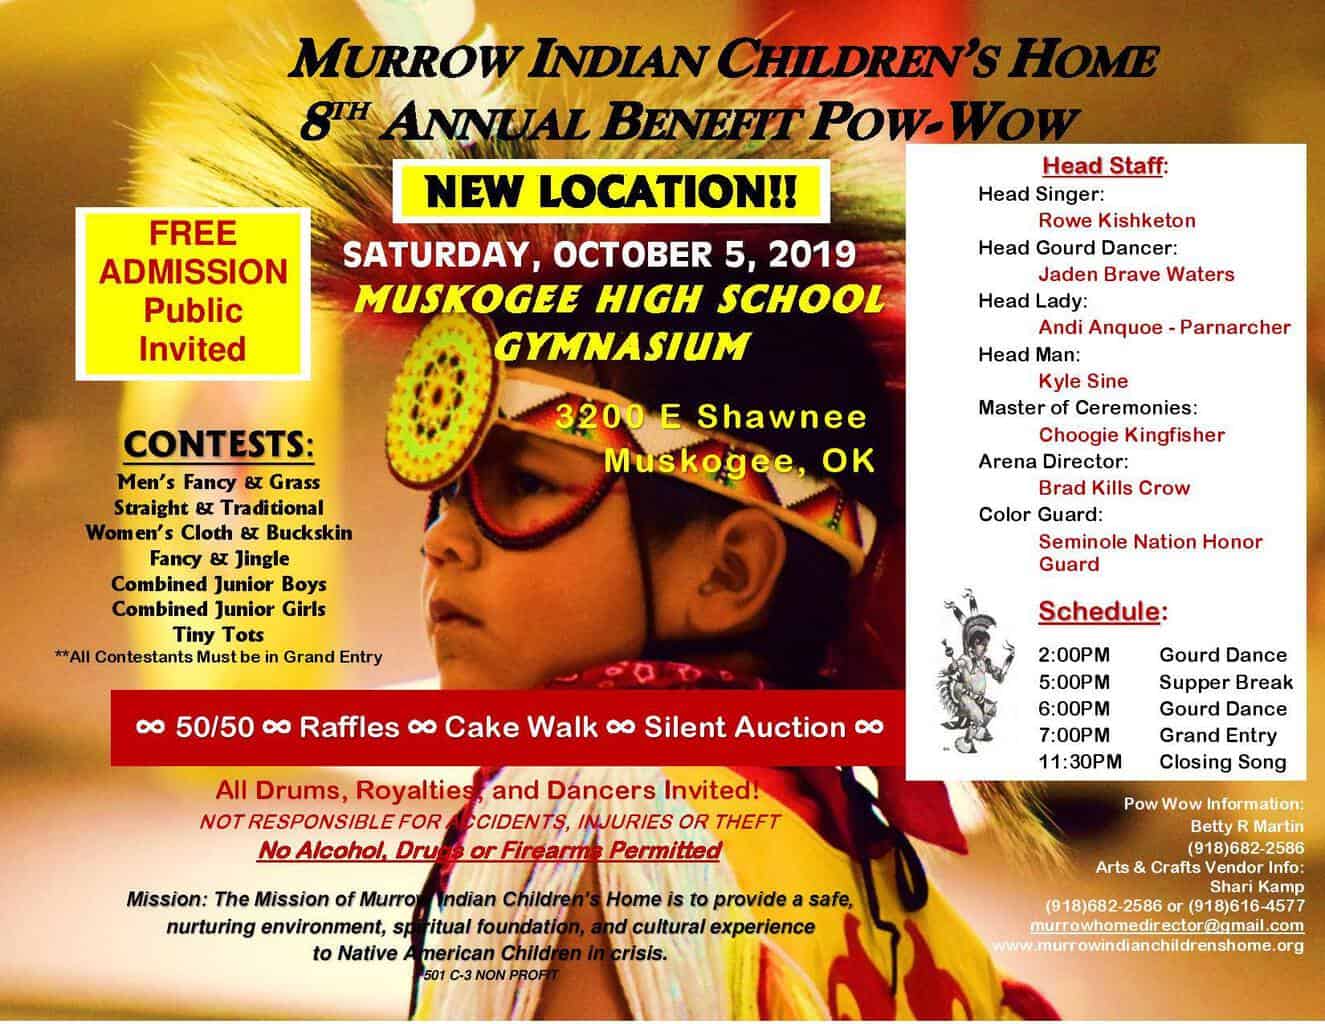 Murrow Indian Children's Home 8th Annual Benefit Pow-Wow